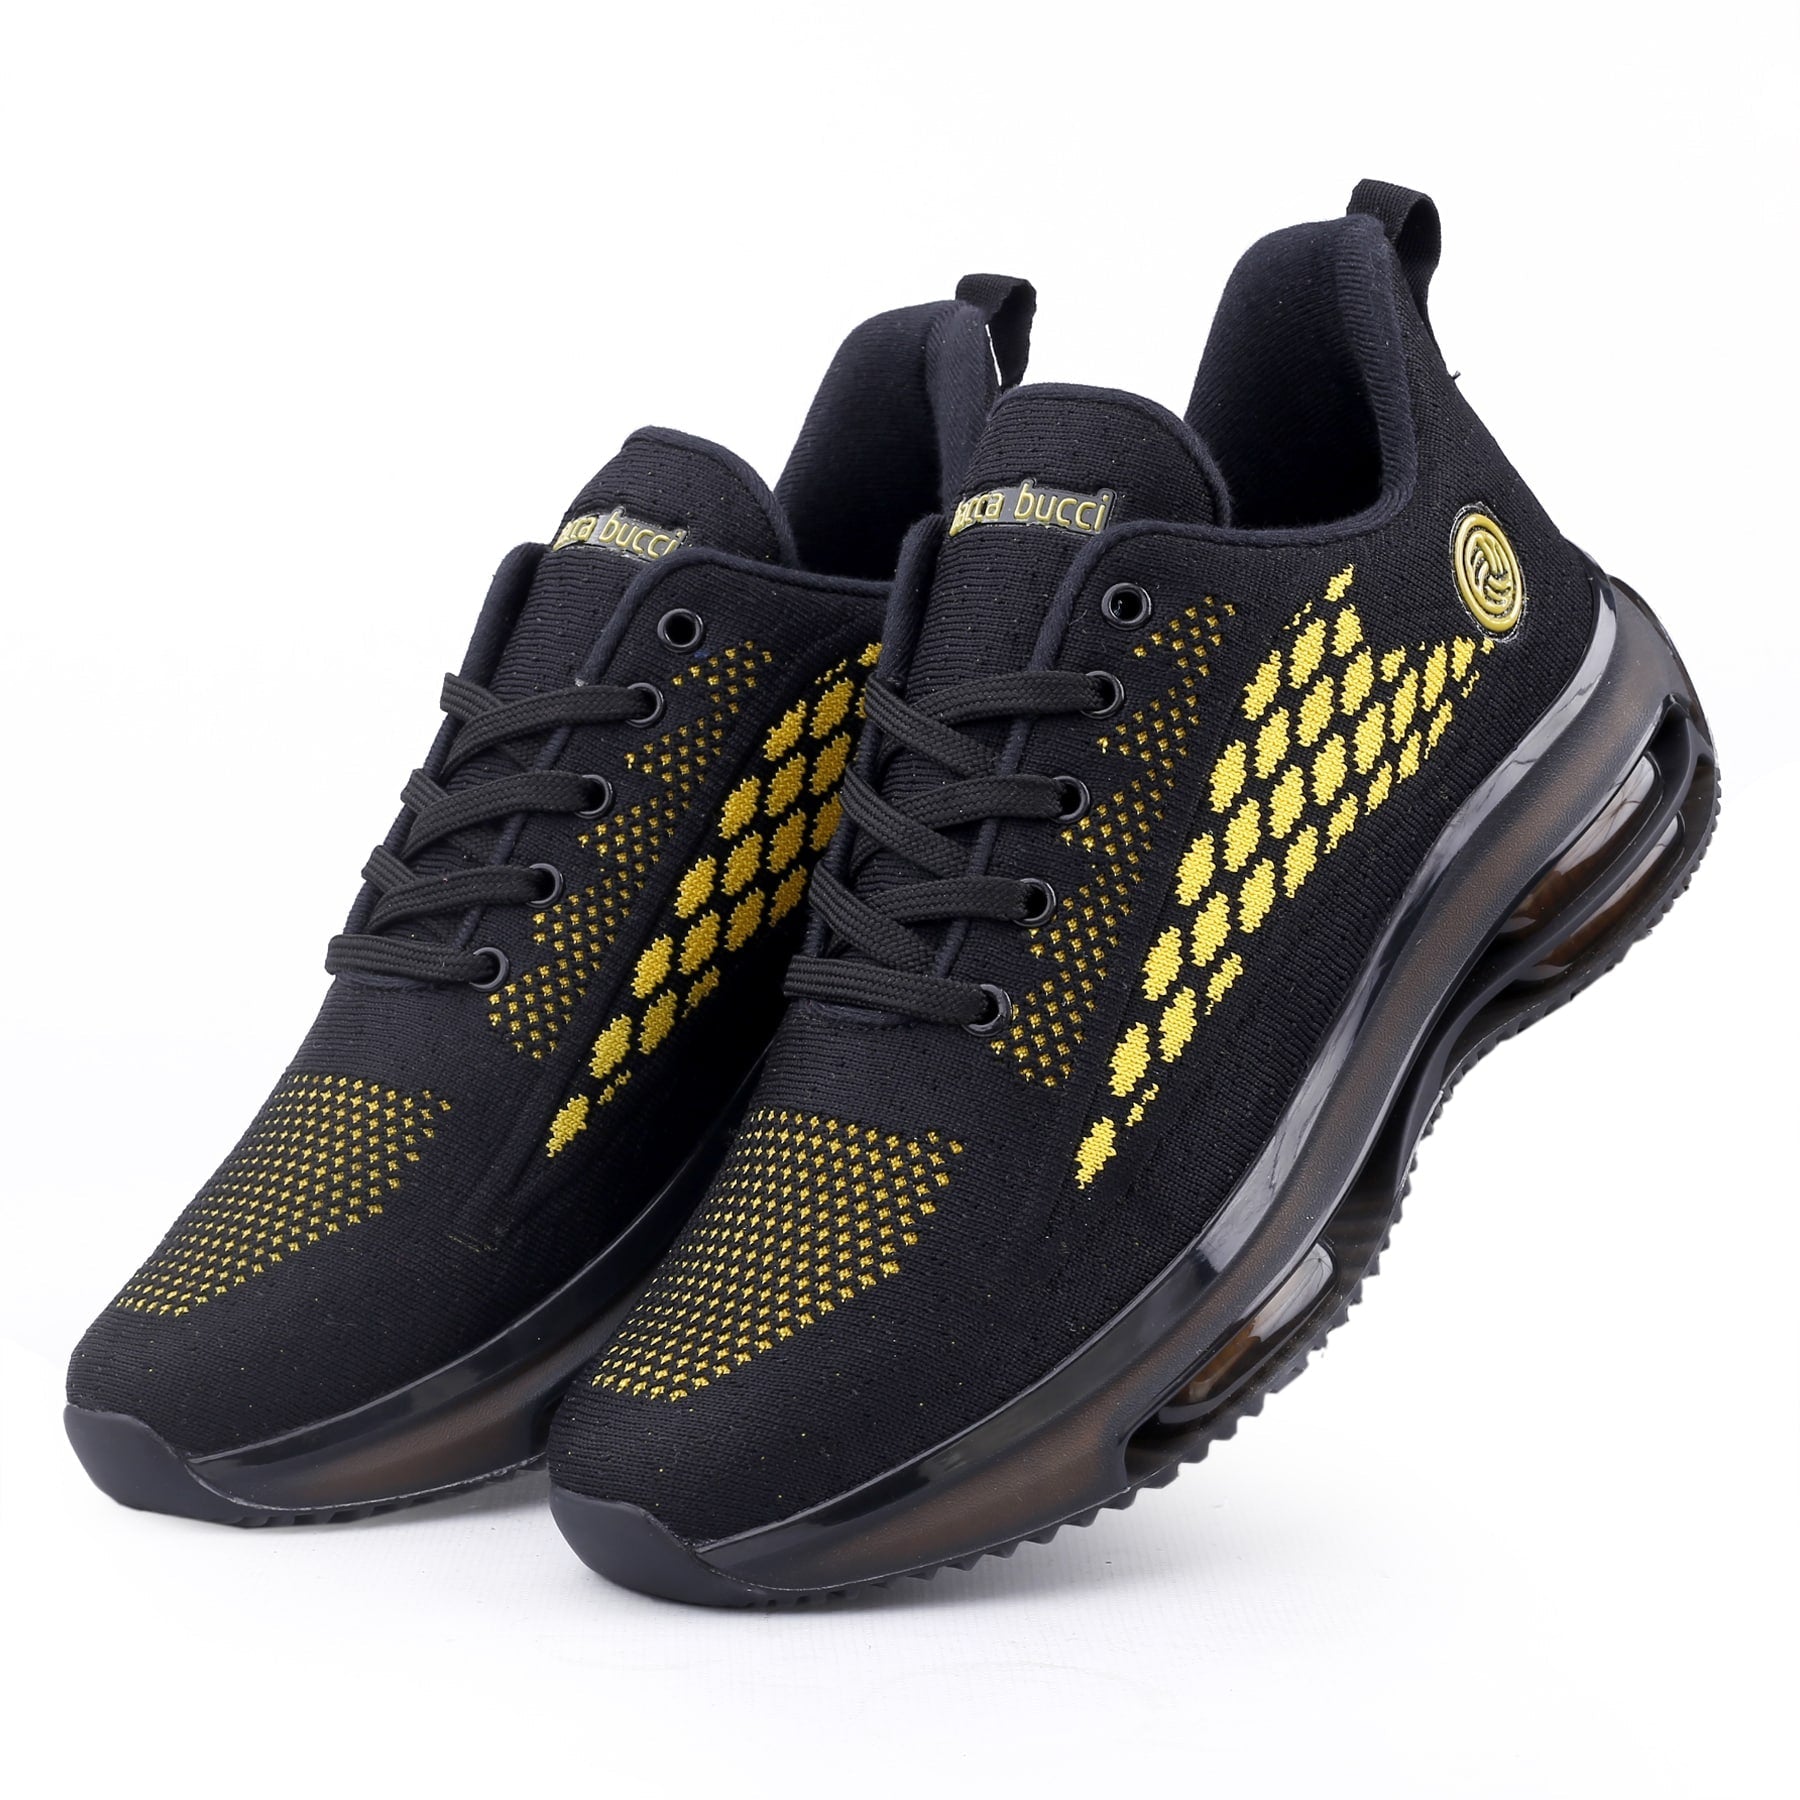 Bacca Bucci BLAZE Men Sports Sneakers -Outdoor, Gym & Training | With Thick Triple Air Bounce Comfort Outsole